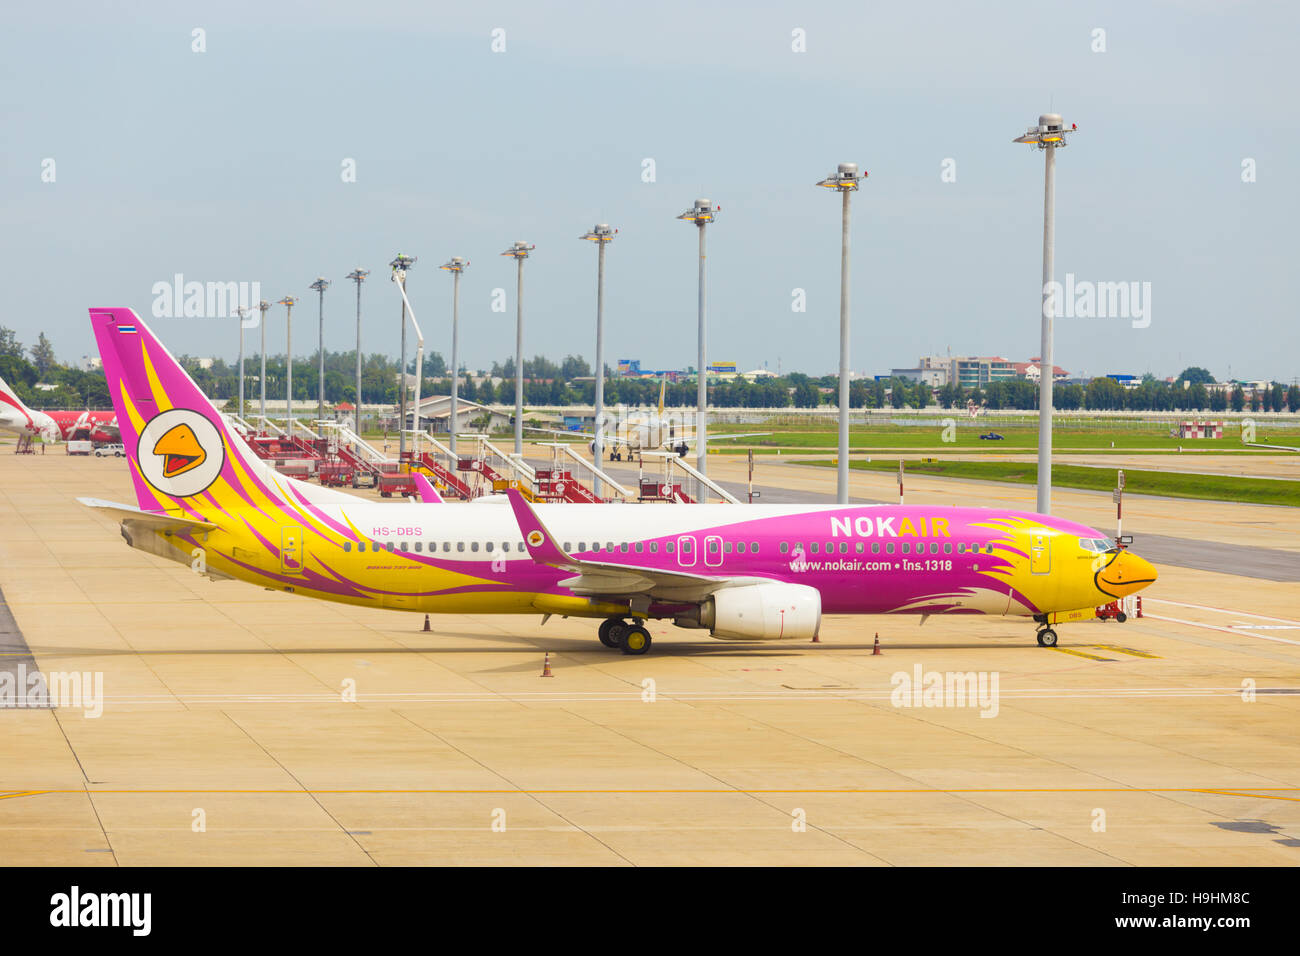 The side of Nok Air airplane parked near the runway at Don Mueang Airport Stock Photo